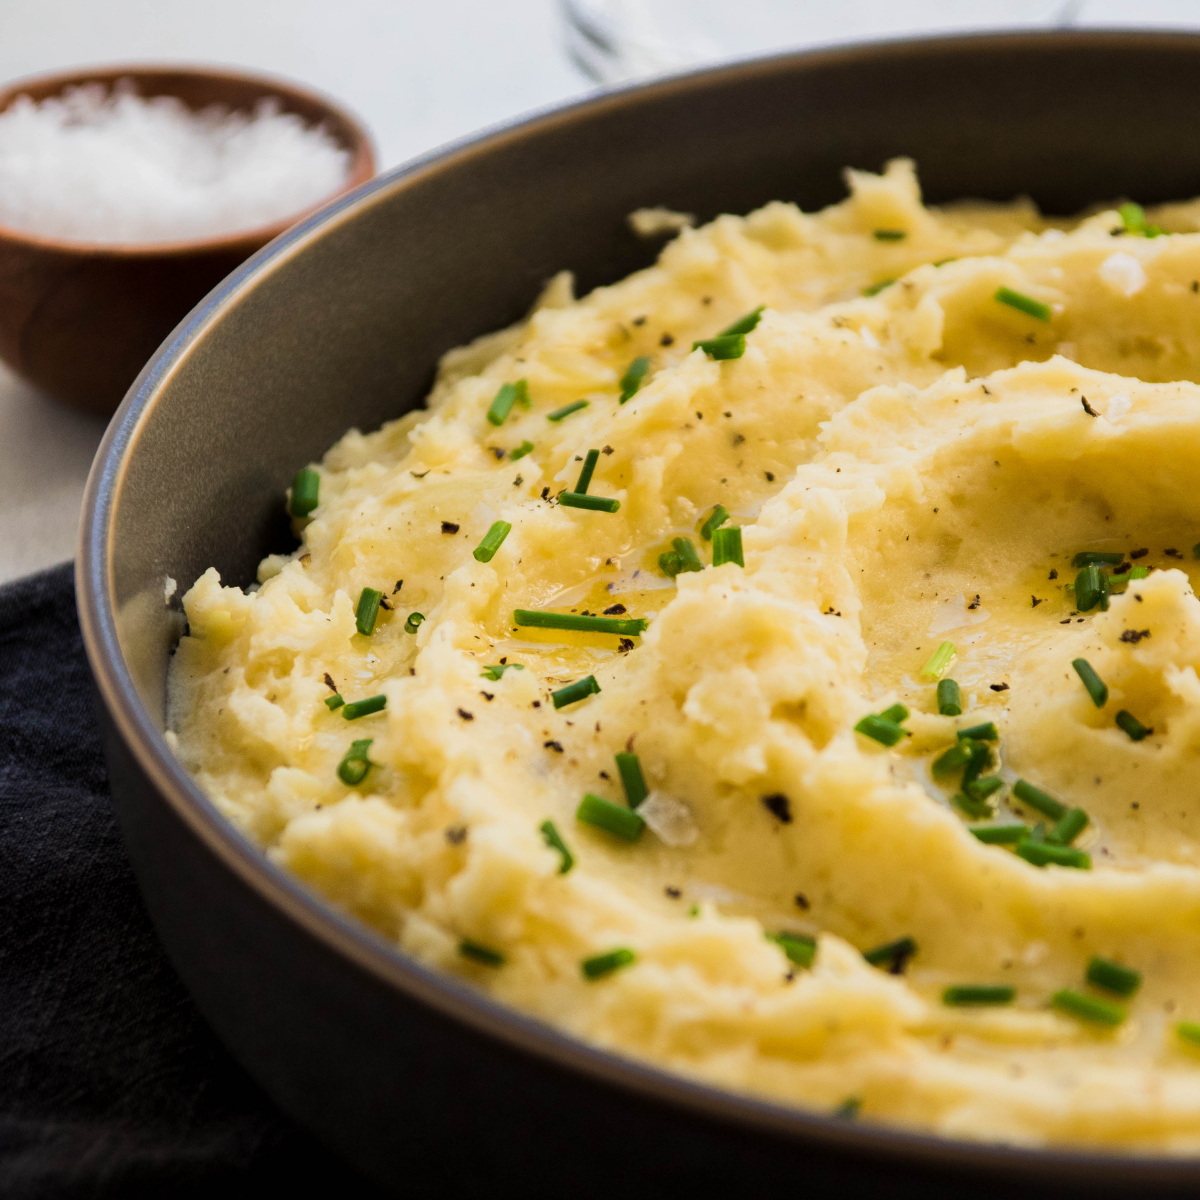 Mashed potatoes topped with fresh chives in a grey bowl on a white table.